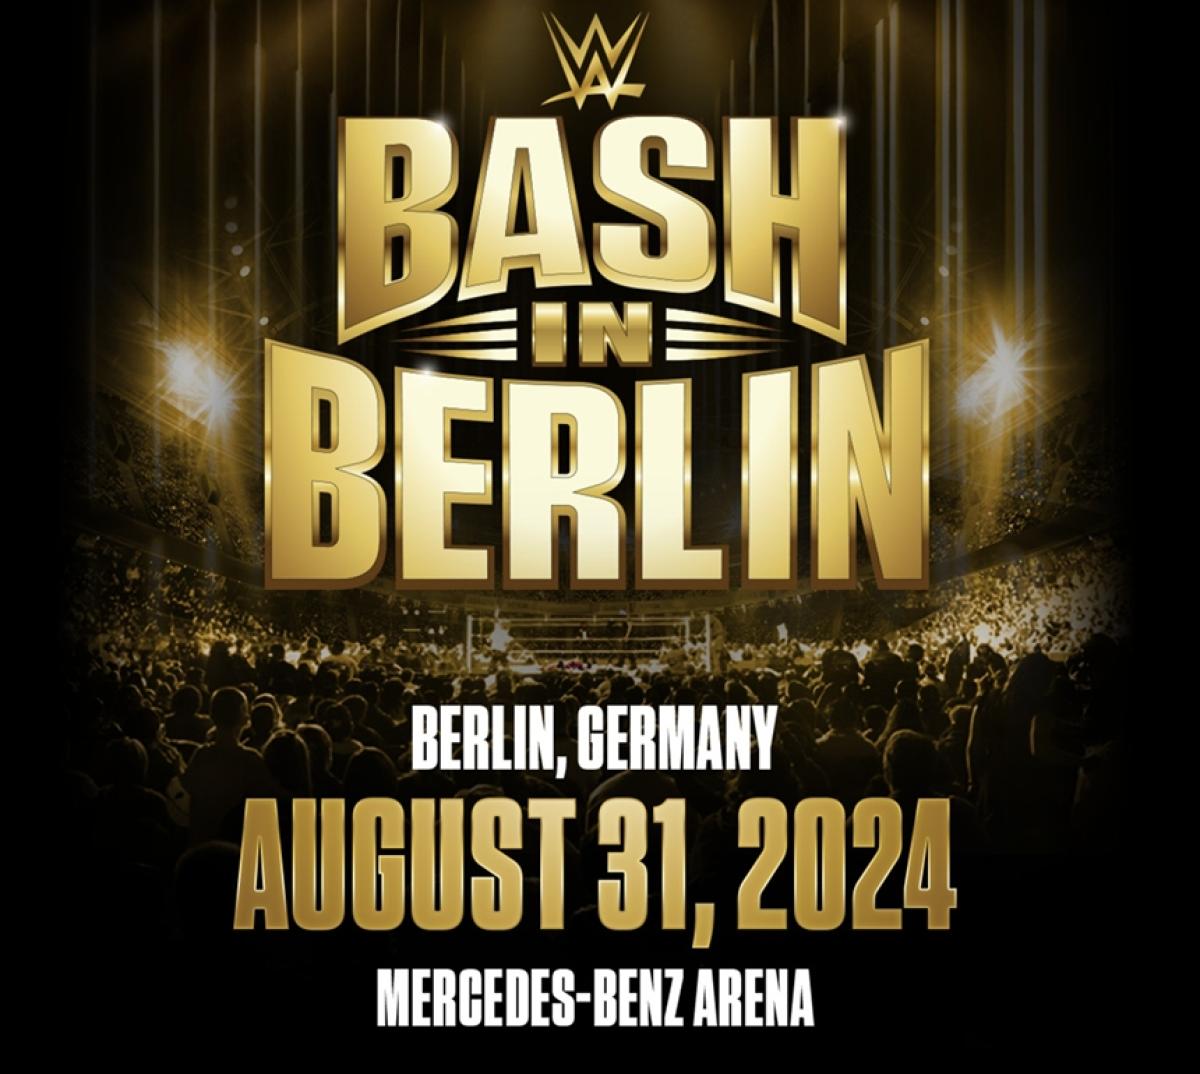 WWE Live - Bash in Berlin at Uber Arena Tickets